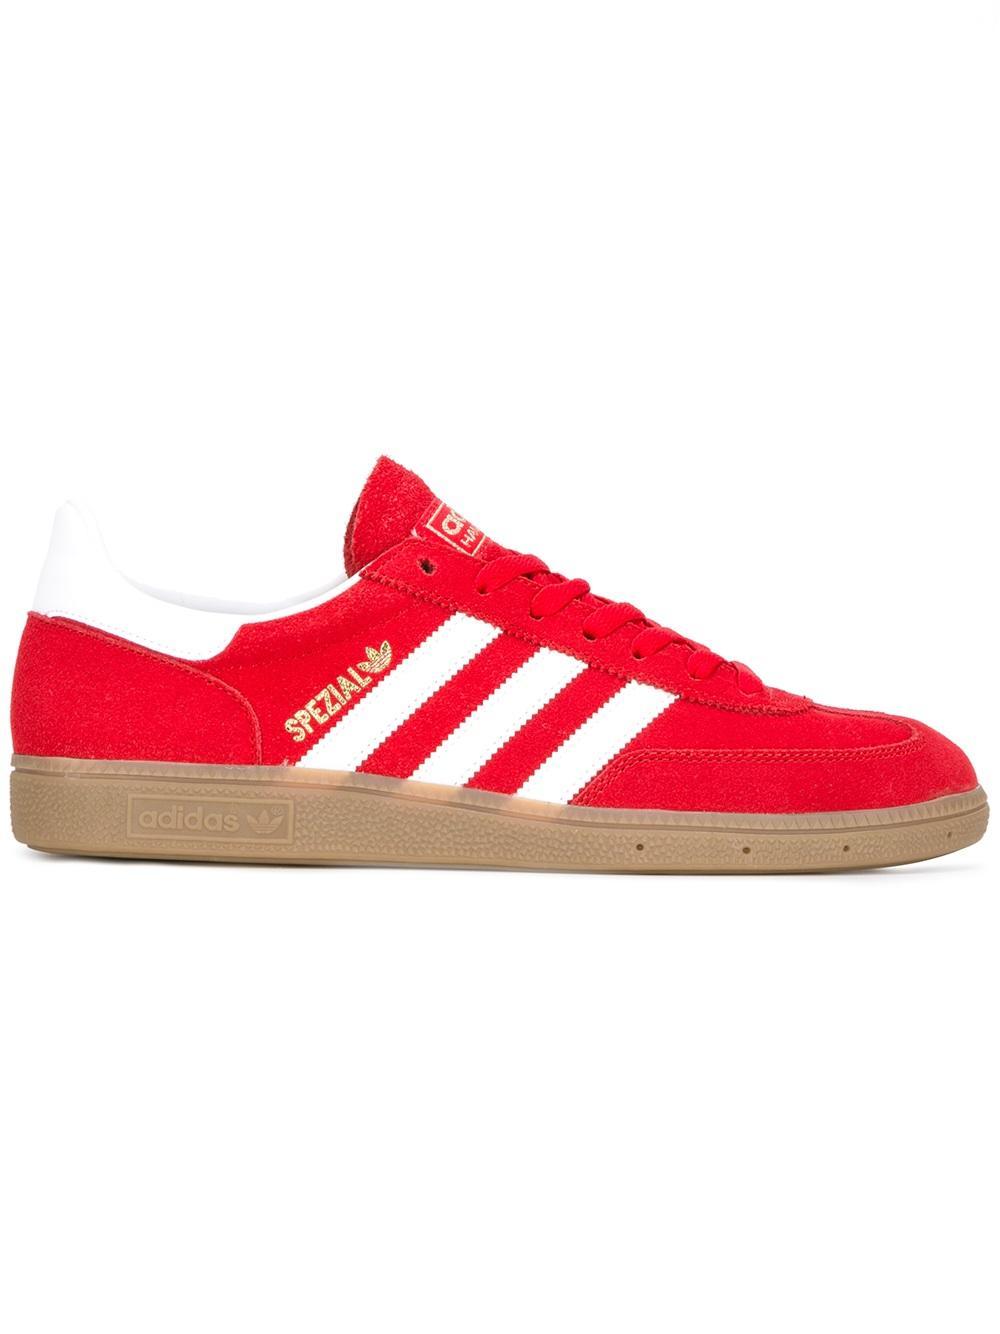 adidas Originals Leather 'handball Spezial' Sneakers in Red for Men - Lyst